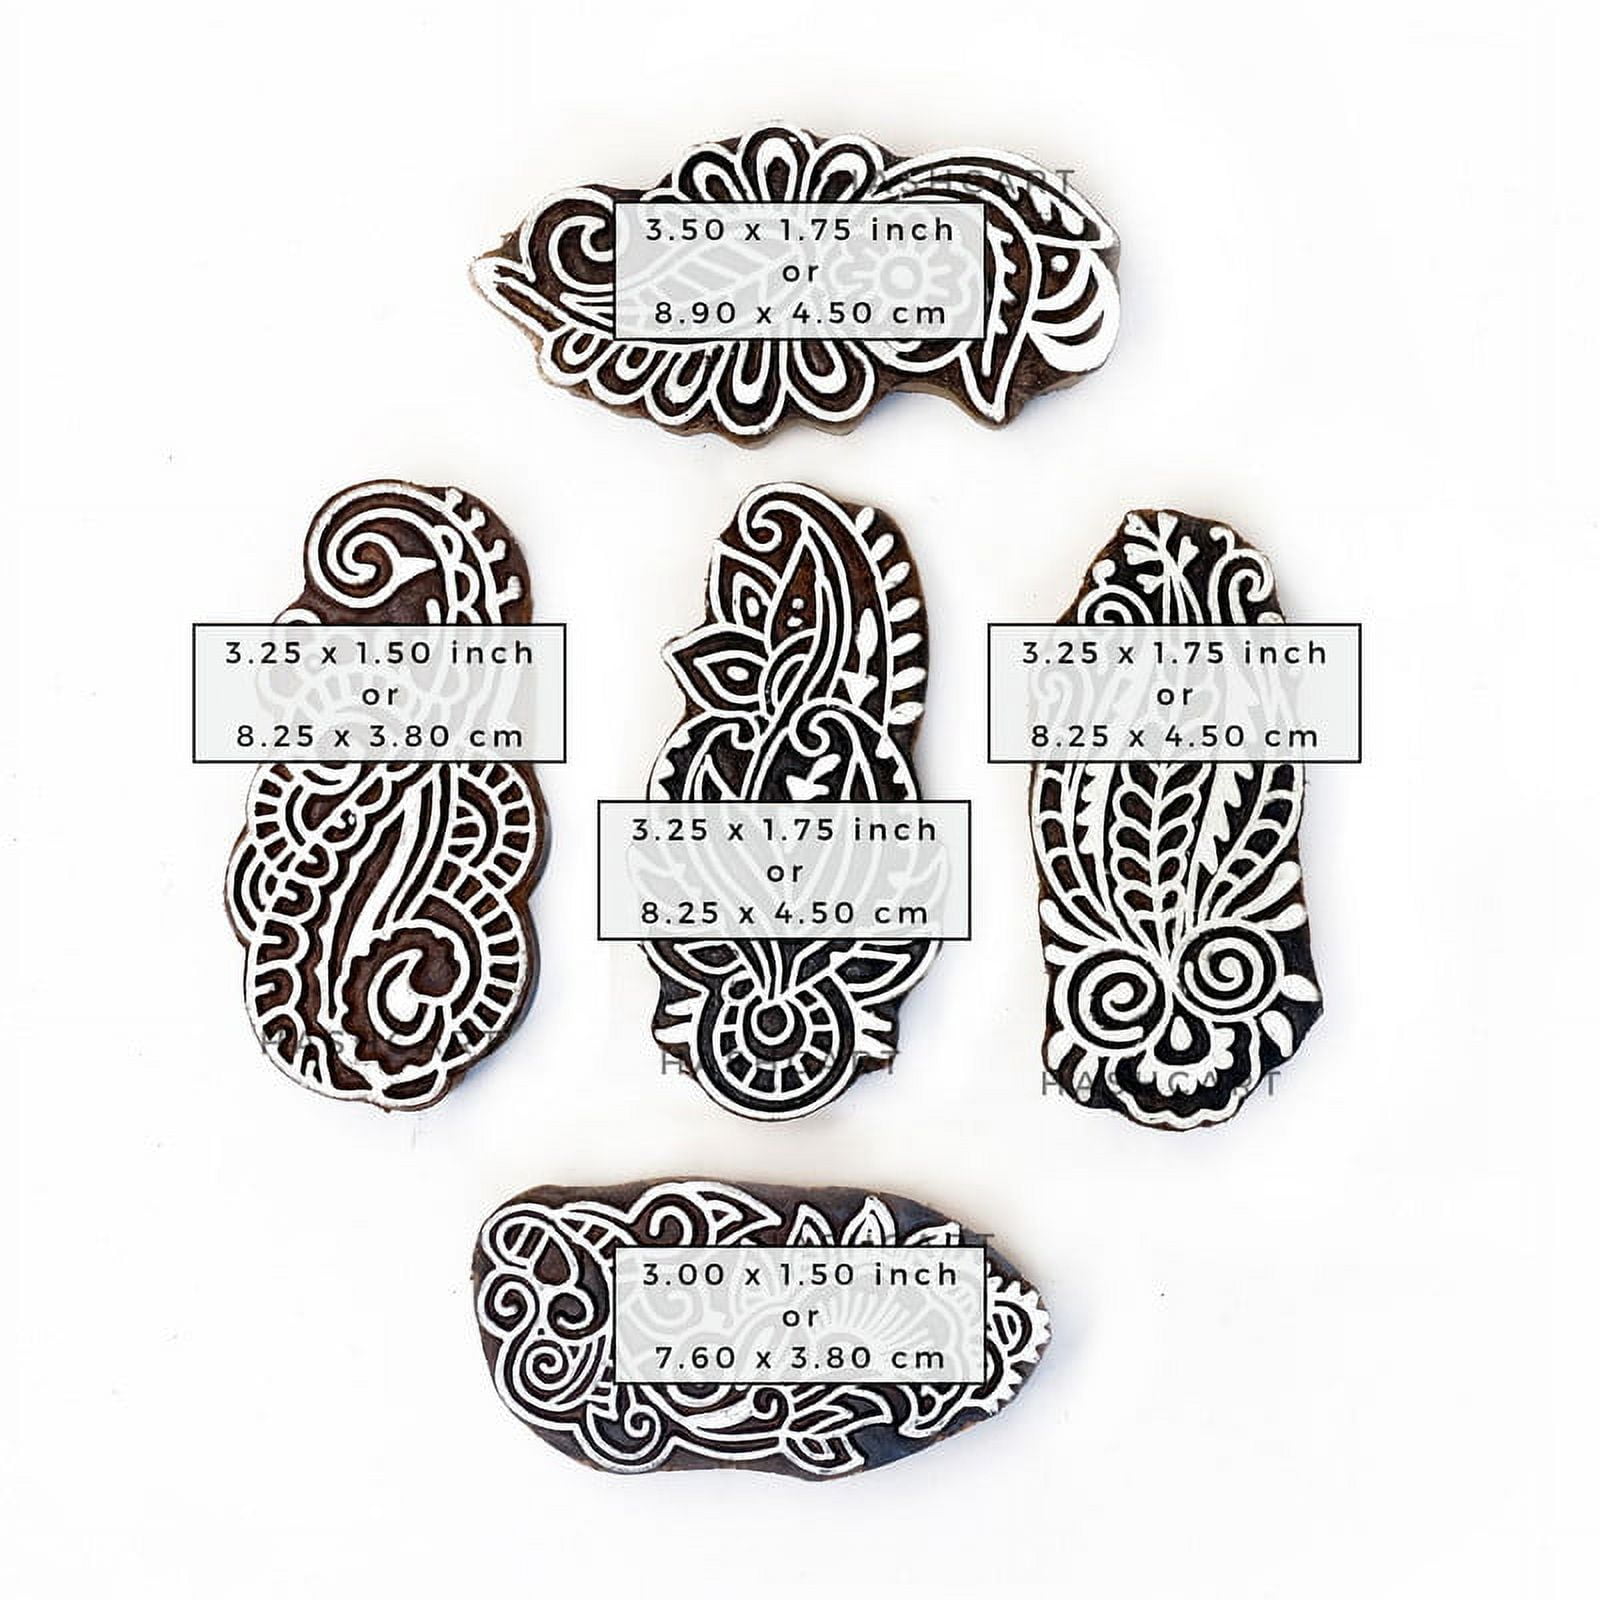 Hashcart Wooden Pottery Stamps for Block Printing - Stamp Set of 10 Wooden Clay Stamps Wood Printing Stamp for Crafting on Fabric, Blocks, Henna